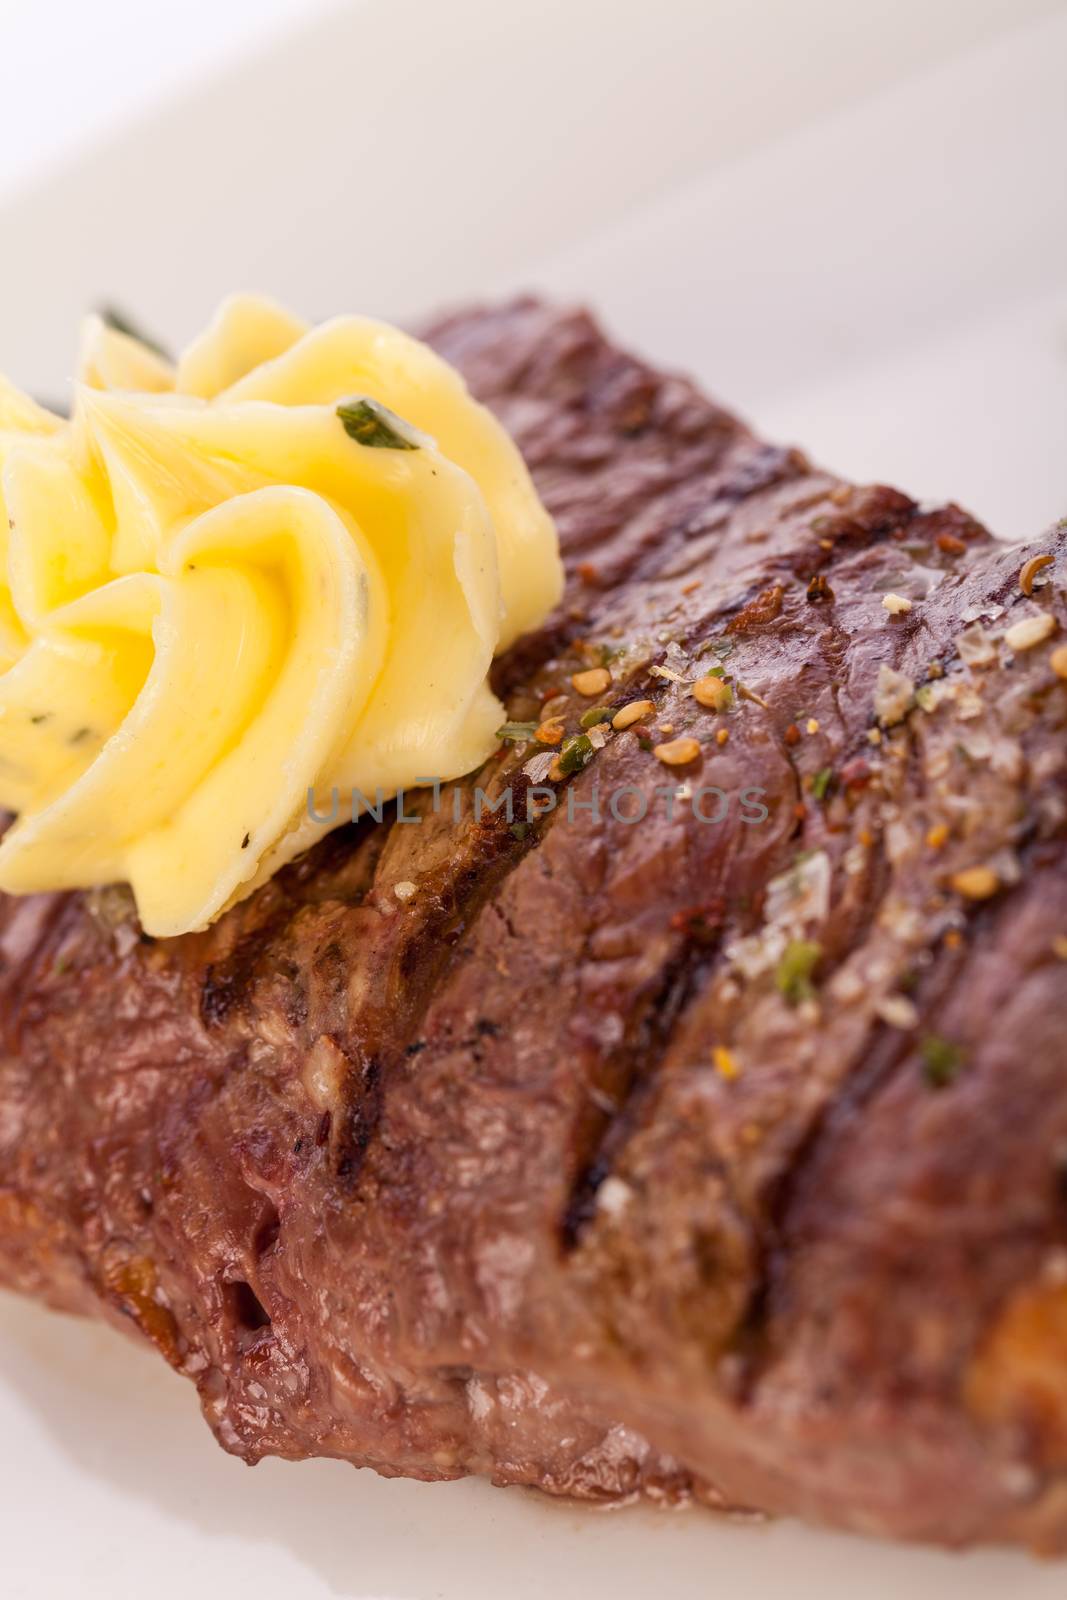 Grilled beef steak topped with butter and rosemary by juniart